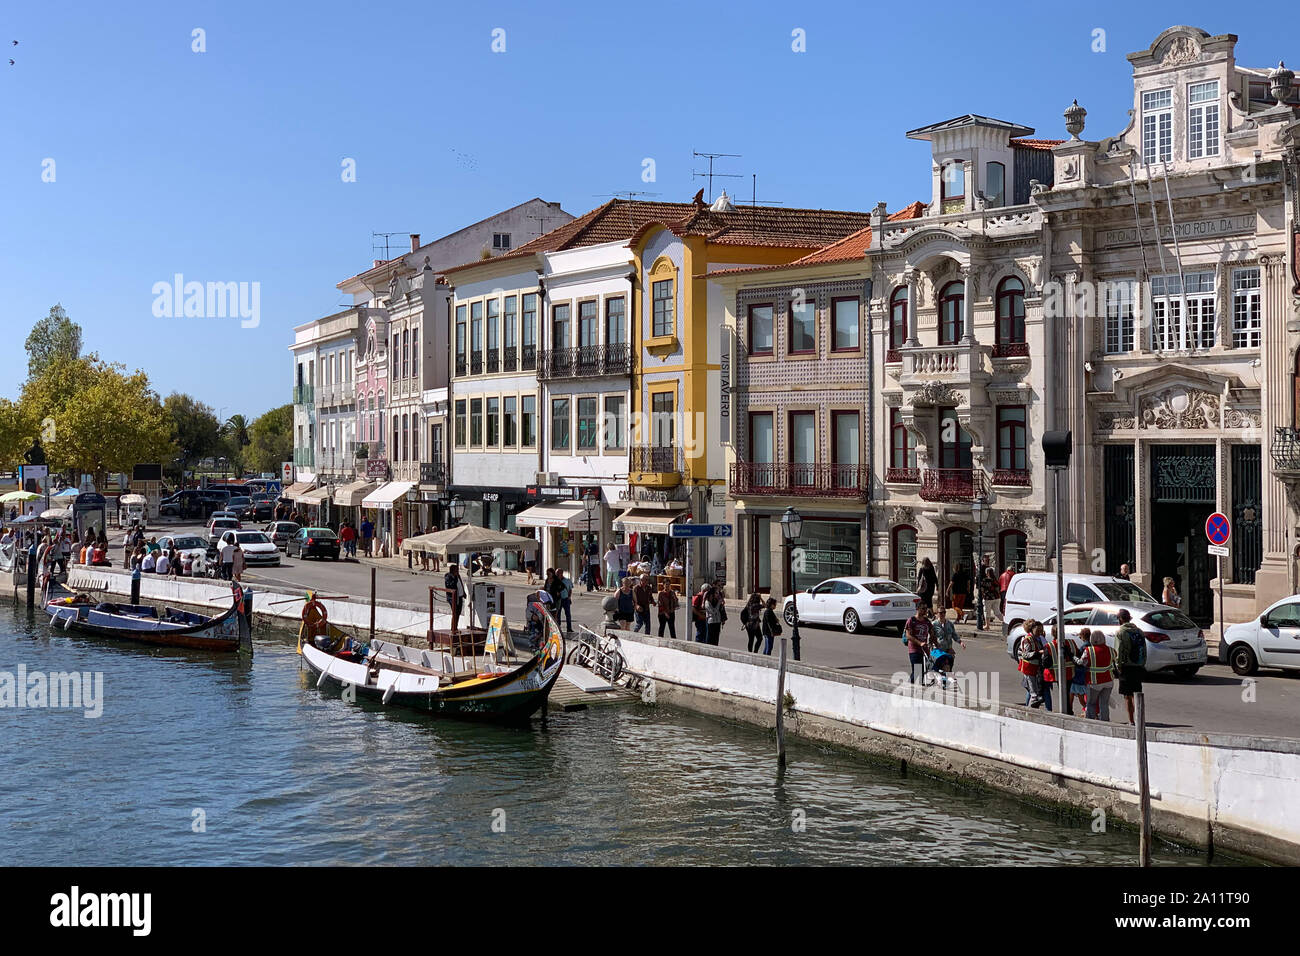 September 2019, City of Aveiro - Portugal, Traditional Moliceiro boats with hand painted bows. Stock Photo